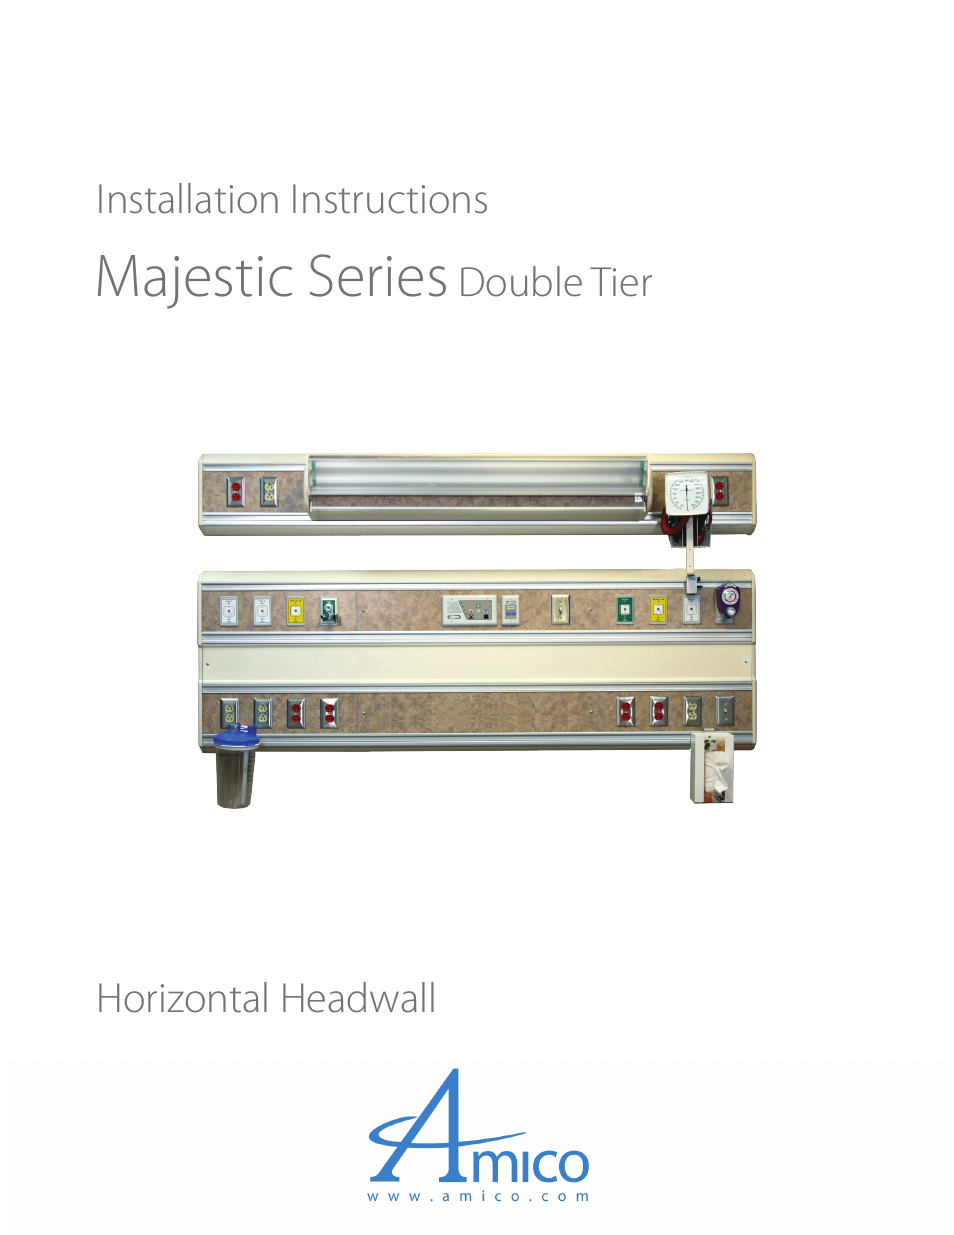 Majestic Series Double Tier Surface Mounted Headwall